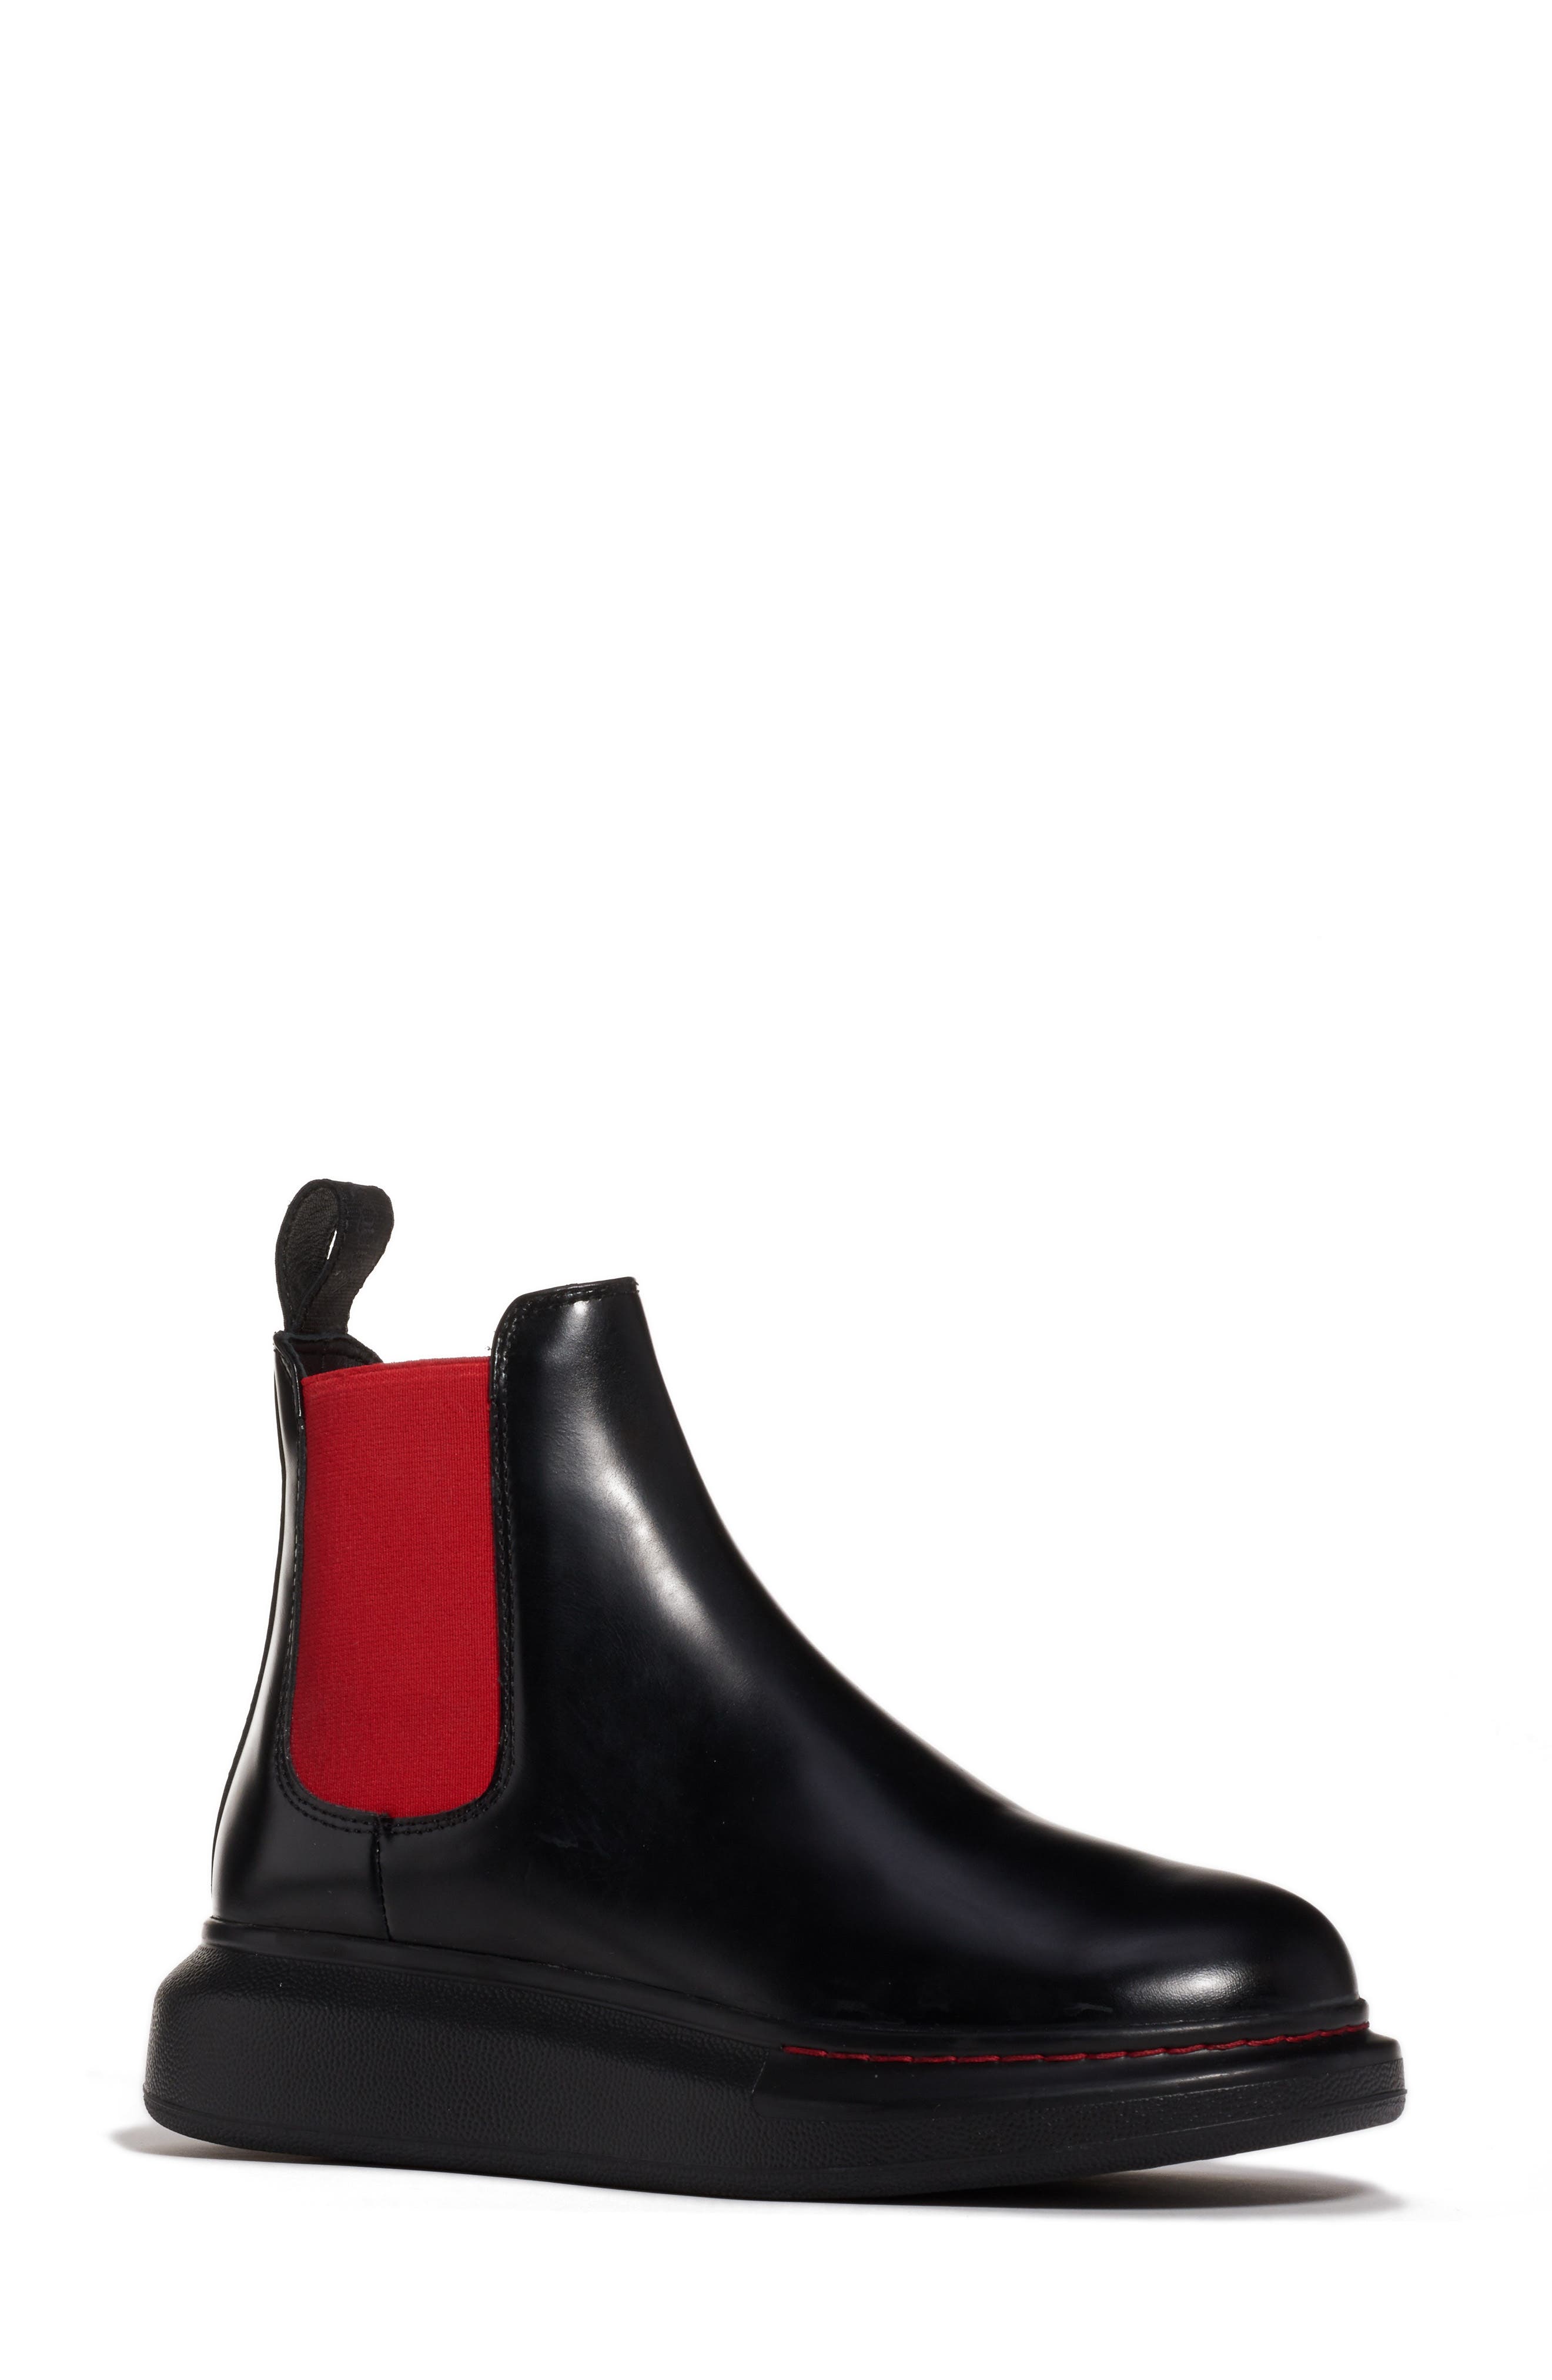 alexander mcqueen black and red chelsea leather boots